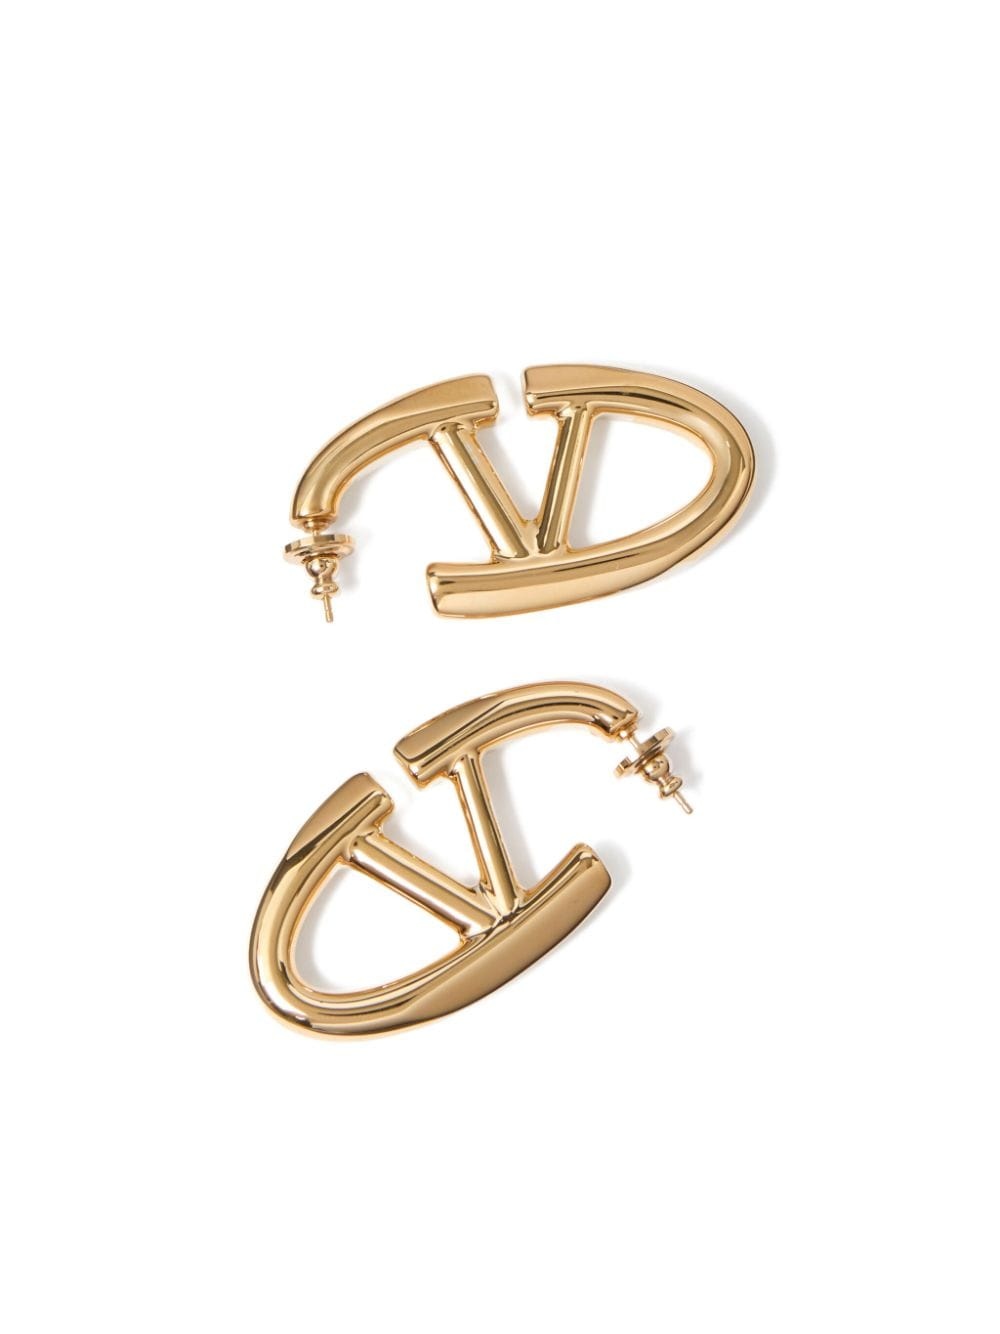 VLogo The Bold Edition earrings - 2